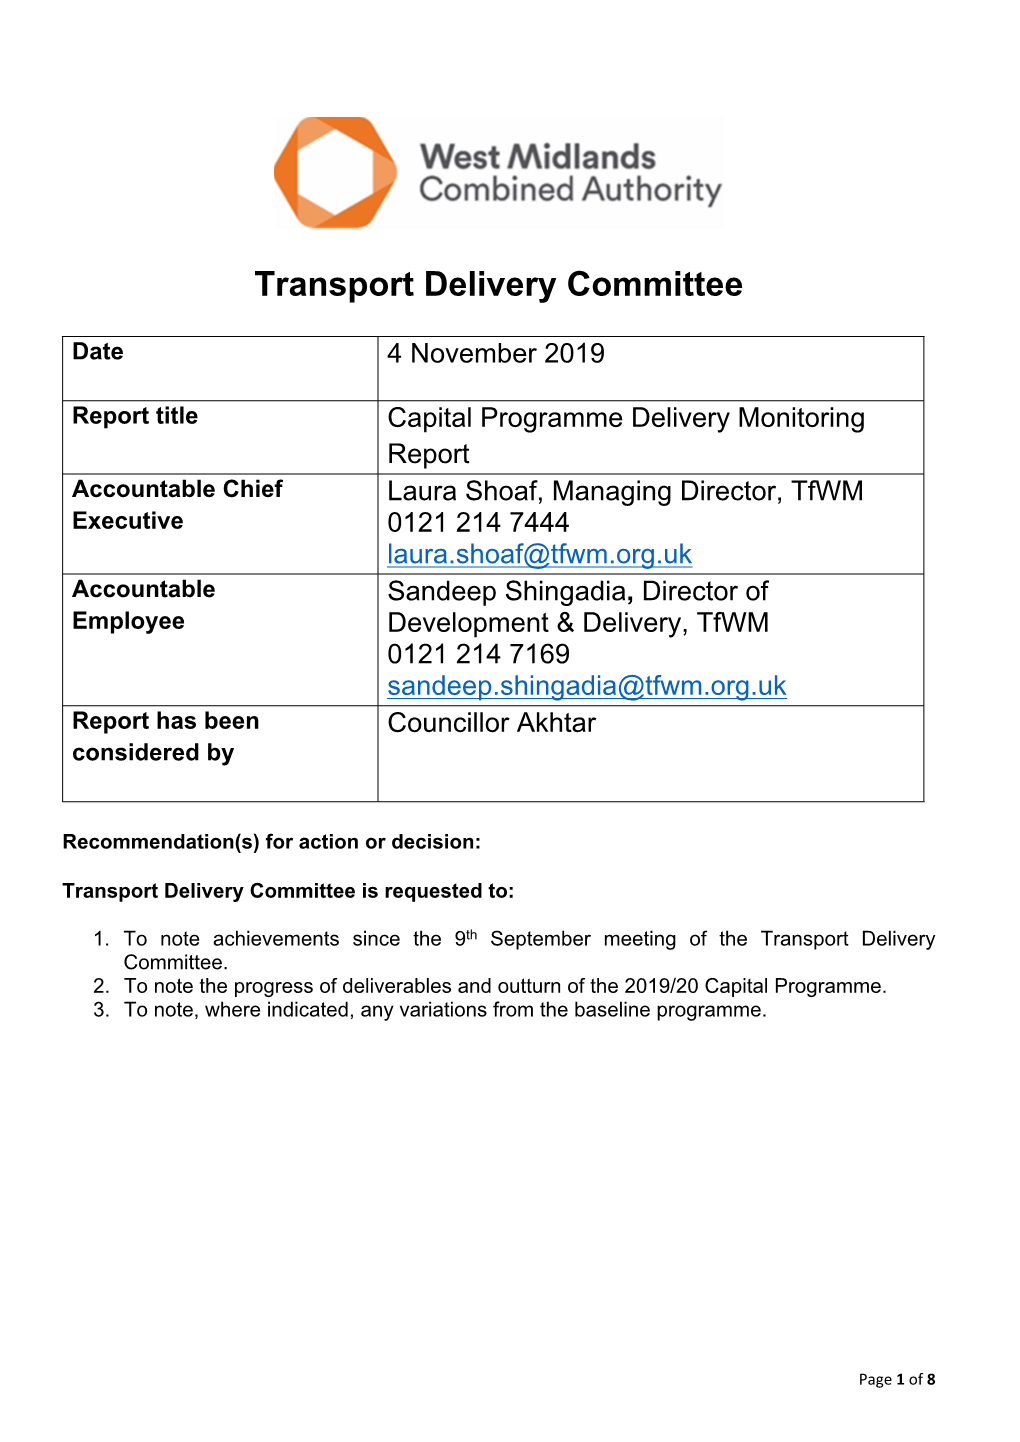 Capital Programme Delivery Monitoring